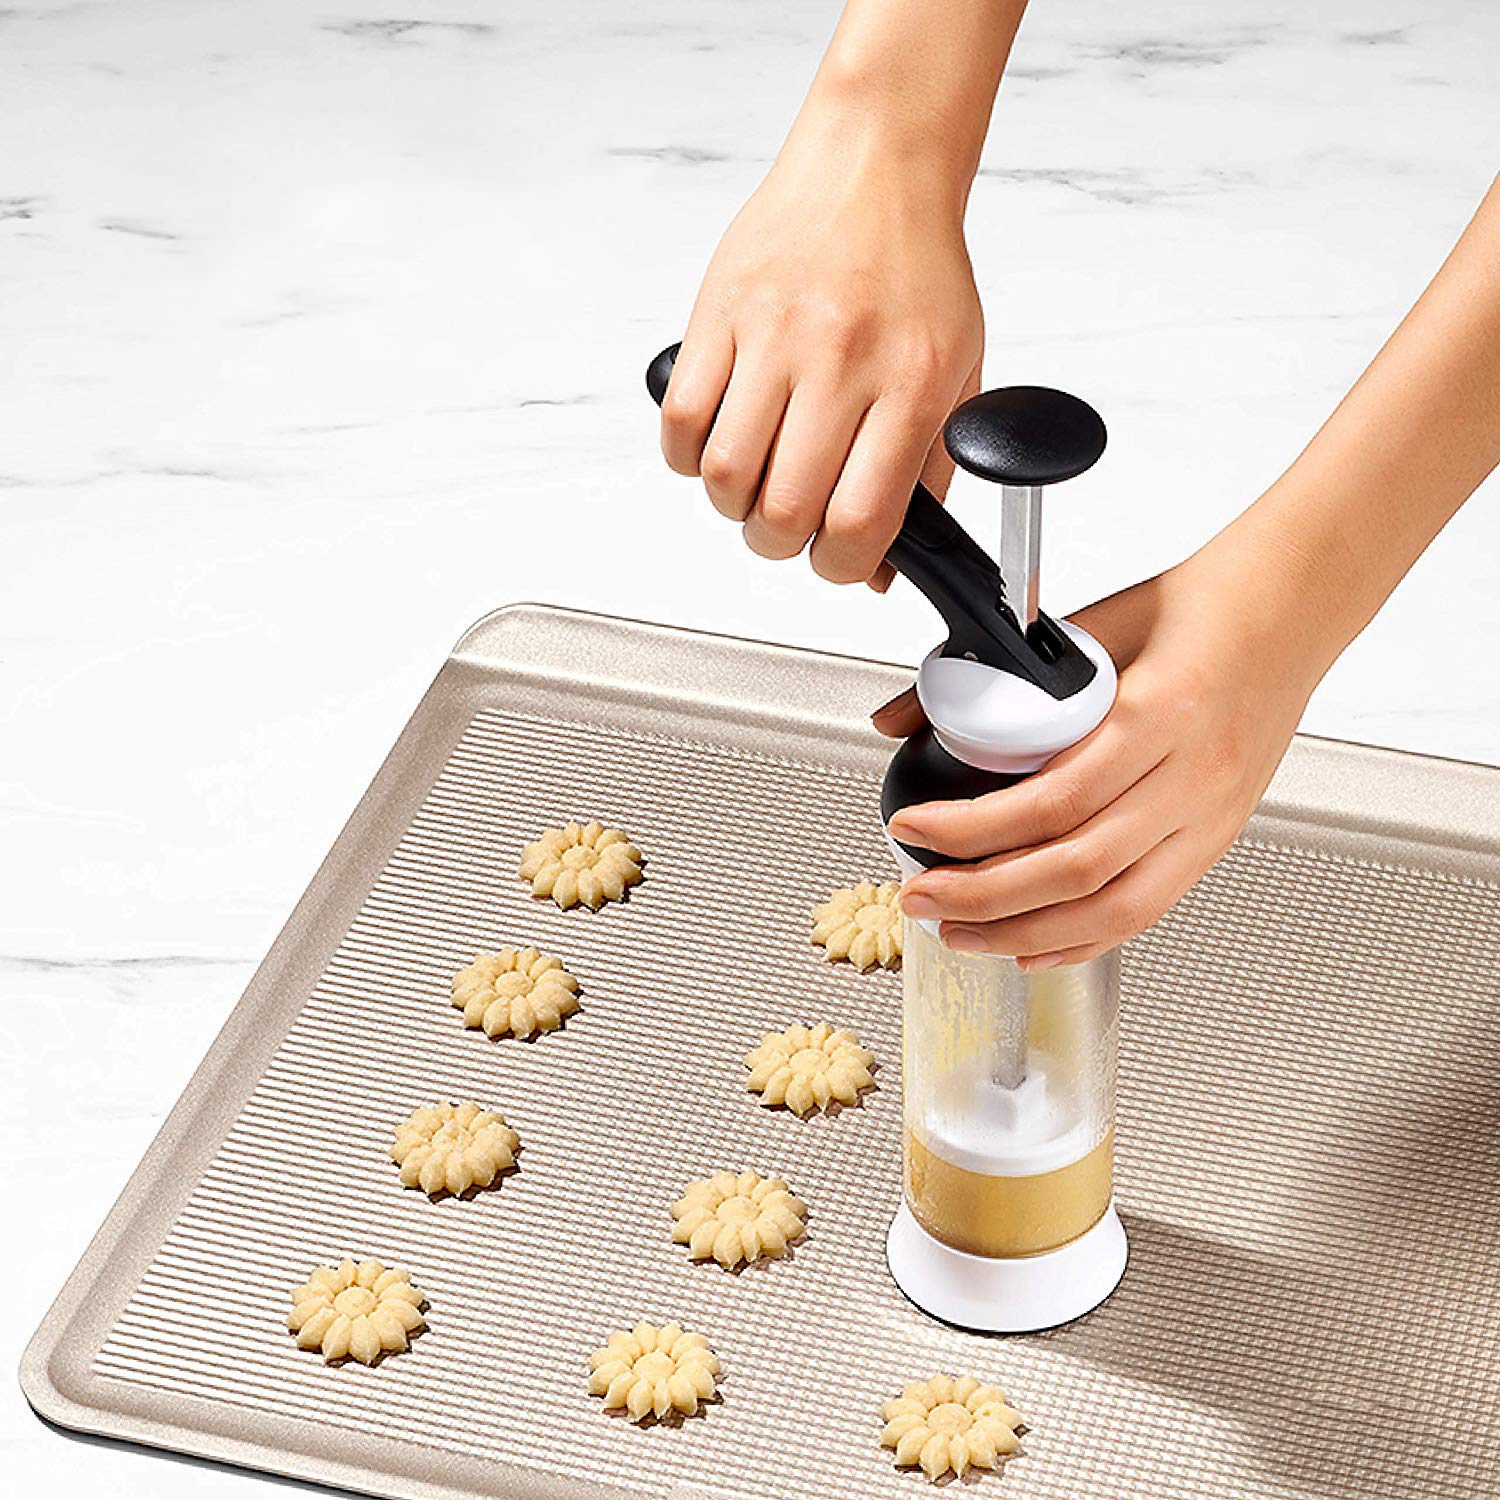 OXO Good Grips Cookie Press with Stainless Steel Disks and Storage Case